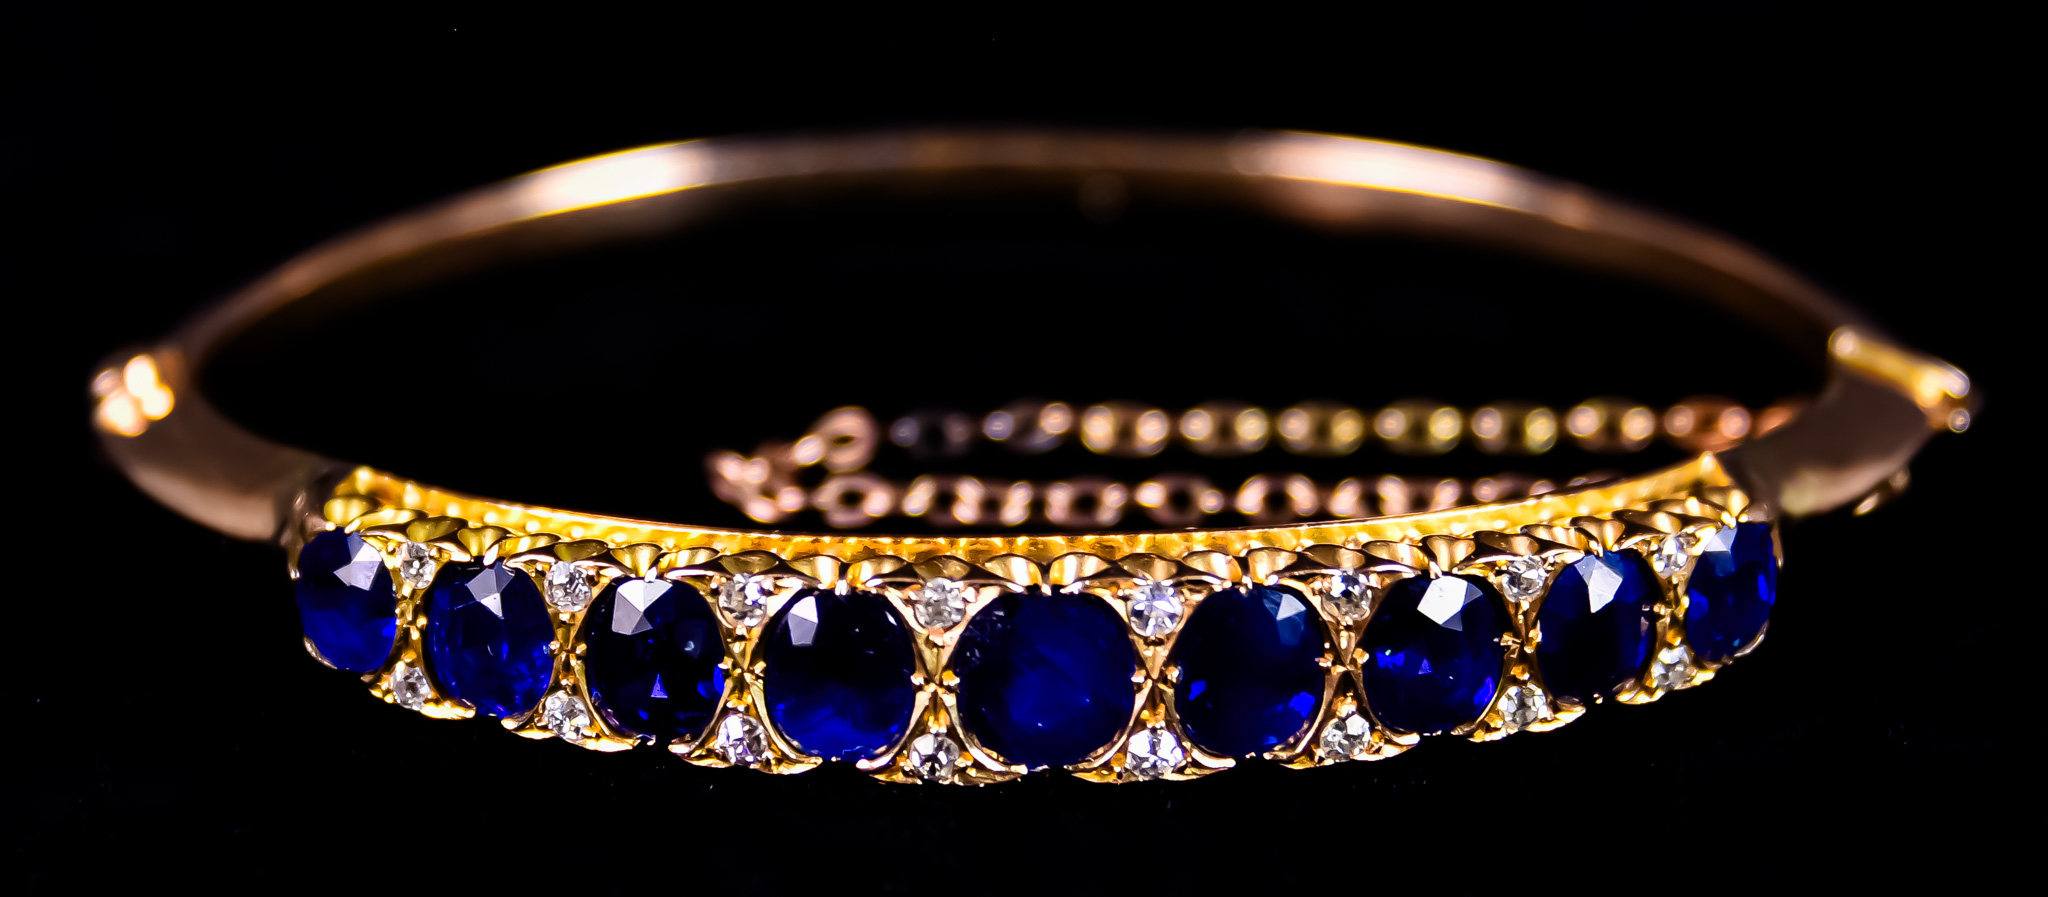 A 14ct Gold Sapphire and Diamond Bracelet, set with nine natural basaltic sapphires, approximately